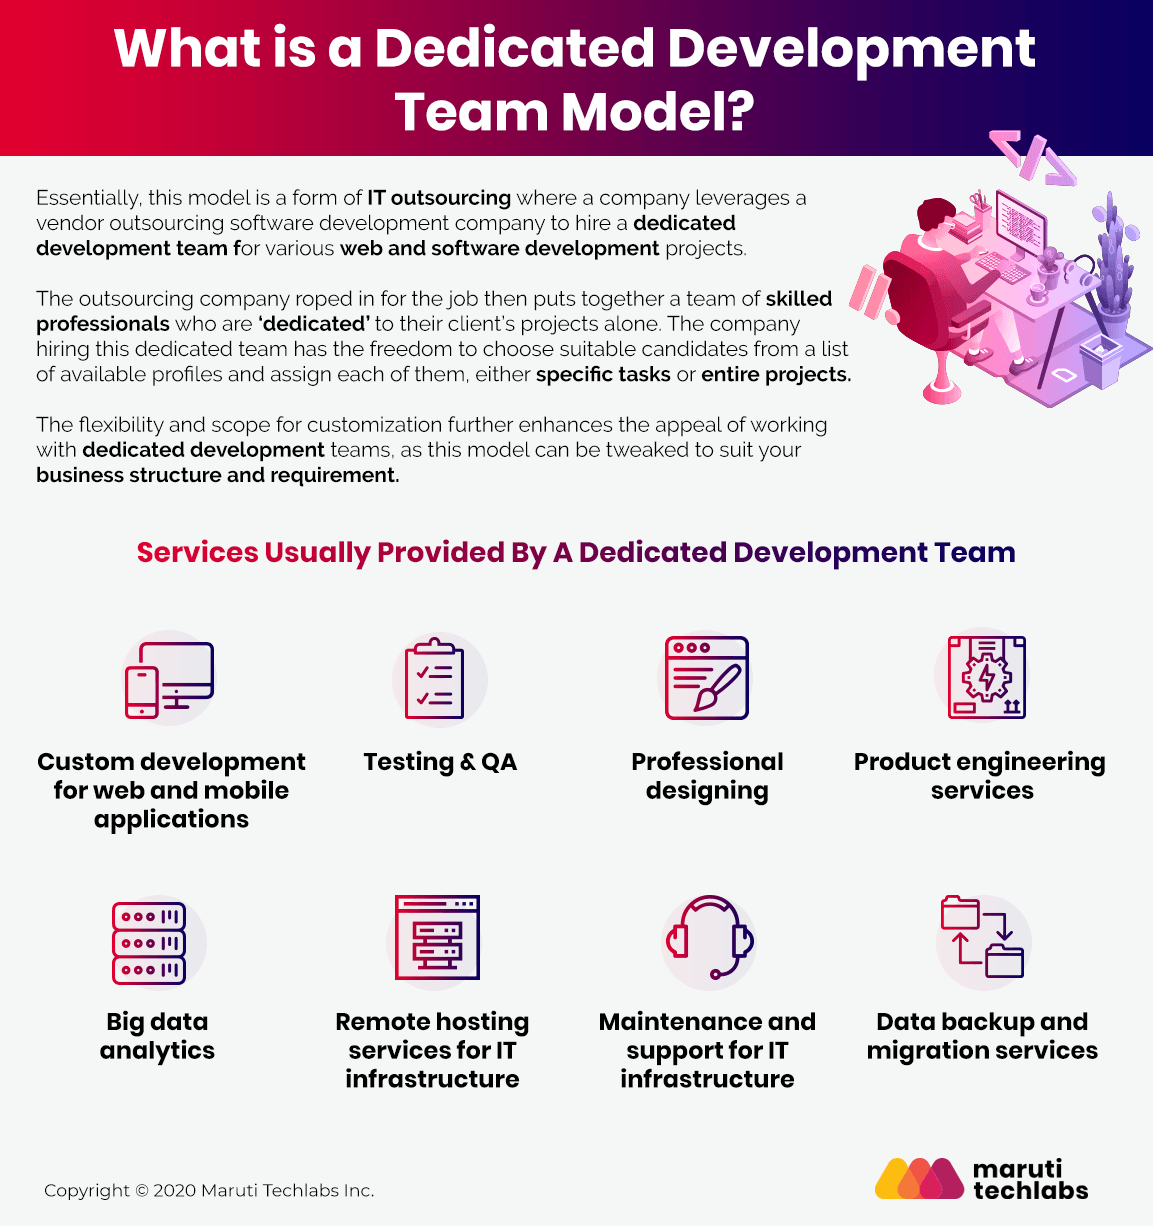 What is a Dedicated Development Team Model?